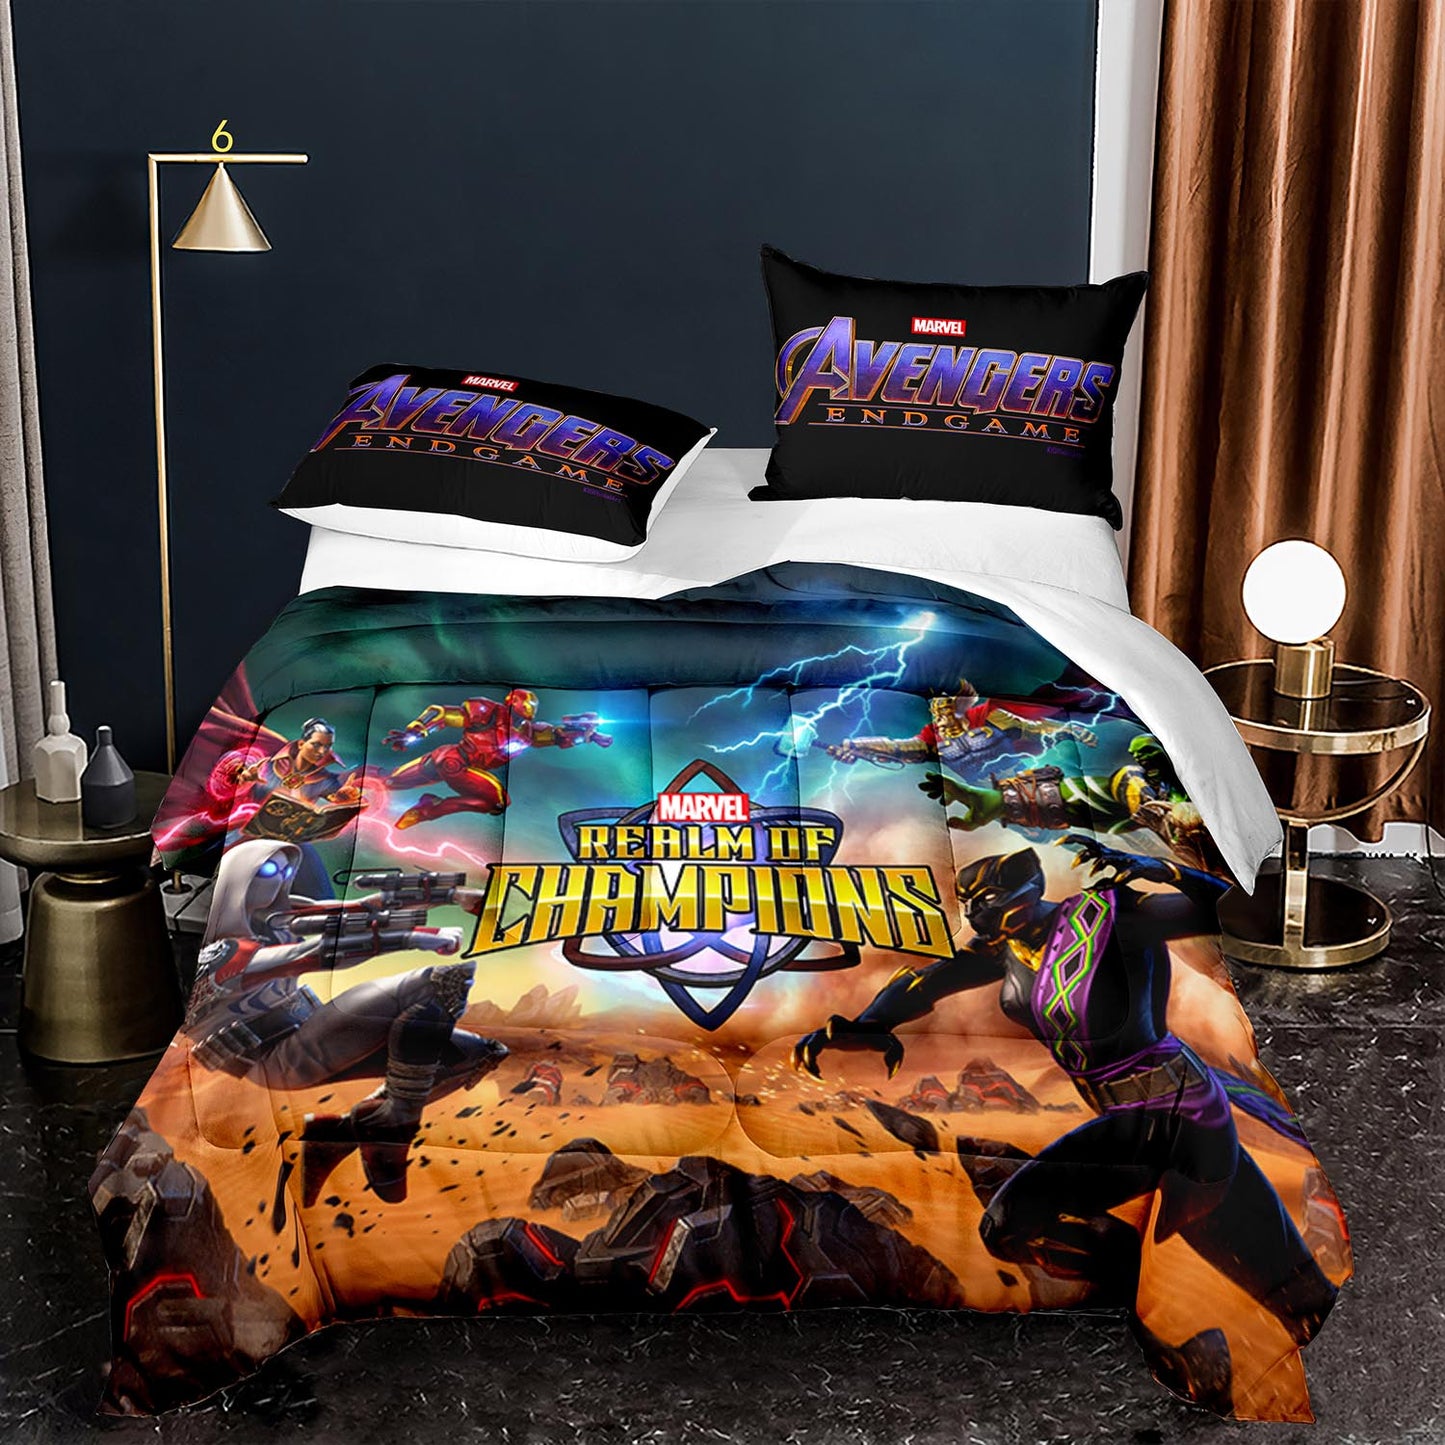 Avengers realm of champions bedding set